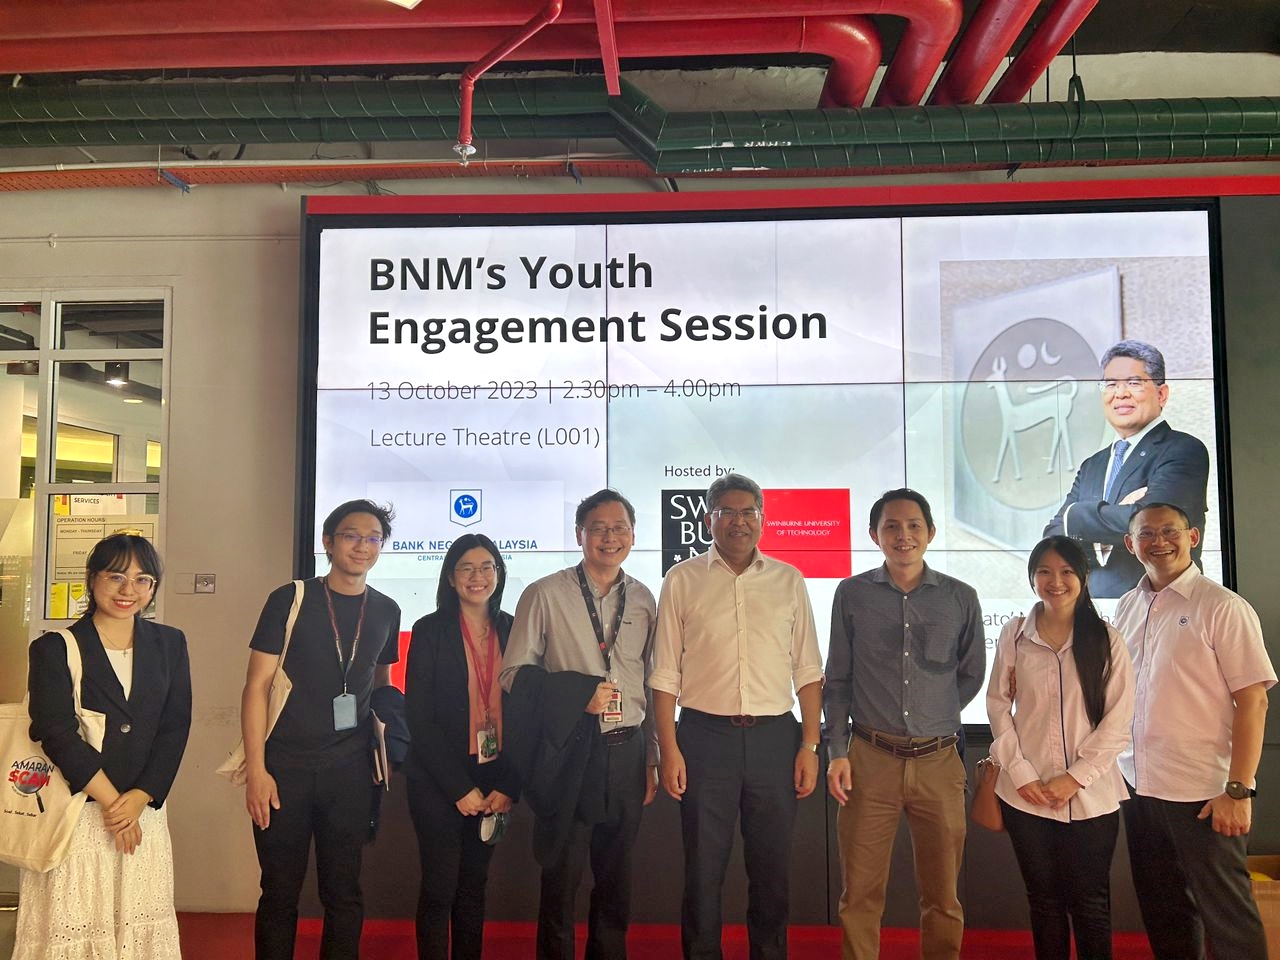 A group photo taken with Dato’ Marzunisham (fourth right), Associate Professor Dr Fung Chorng Yuan, Head of School, School of Business, Swinburne Sarawak (fourth left) along with the teams from BNM and Swinburne School of Business. 